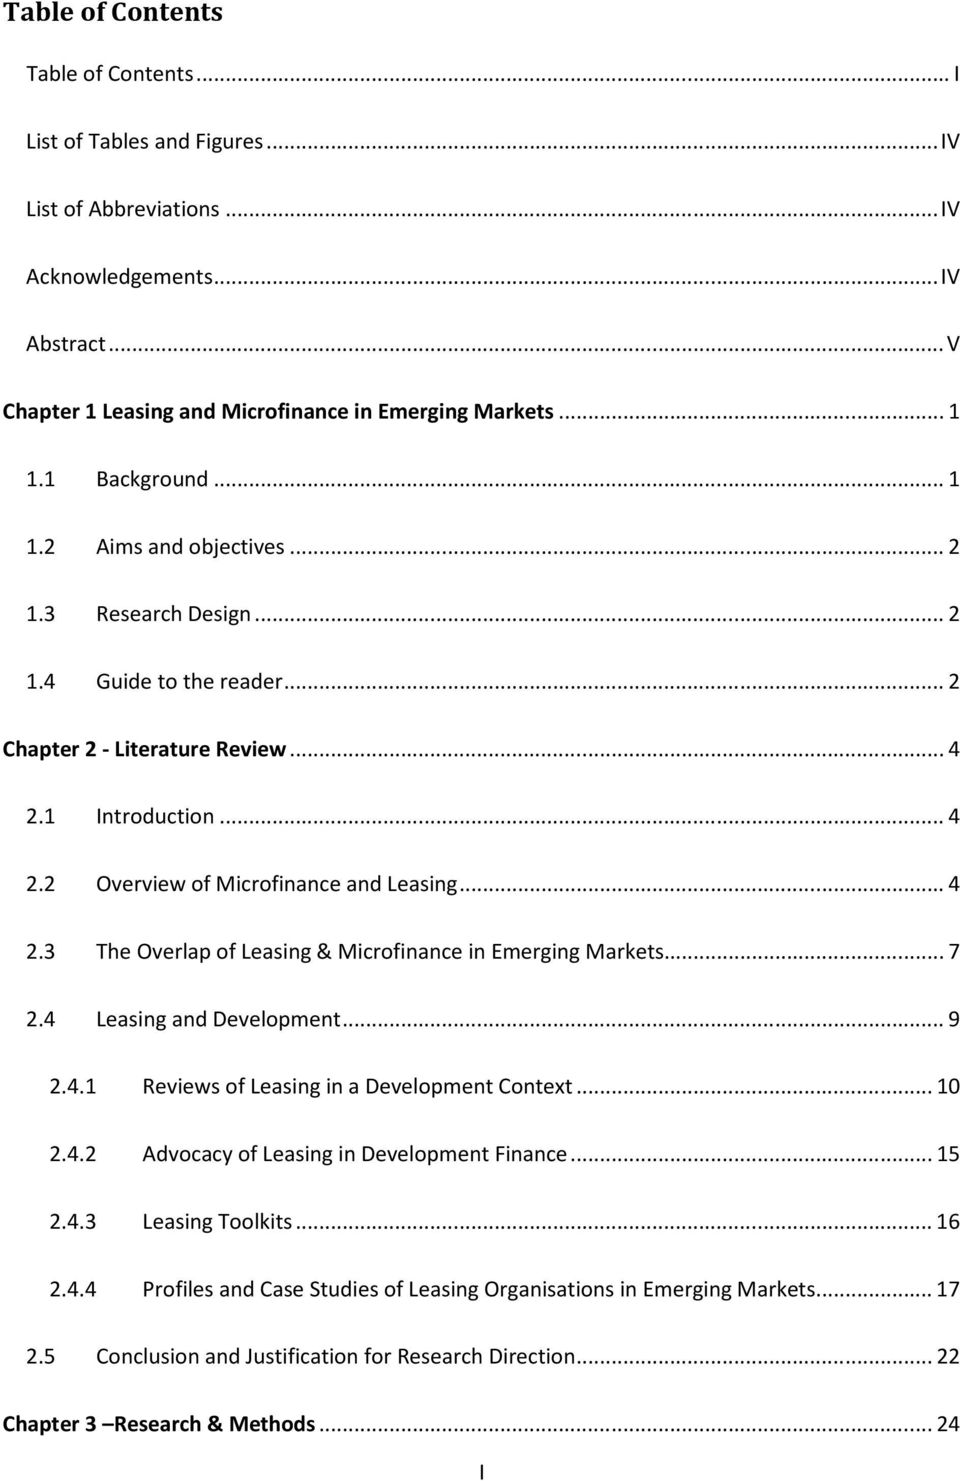 .. 4 2.3 The Overlap of Leasing & Microfinance in Emerging Markets... 7 2.4 Leasing and Development... 9 2.4.1 Reviews of Leasing in a Development Context... 10 2.4.2 Advocacy of Leasing in Development Finance.